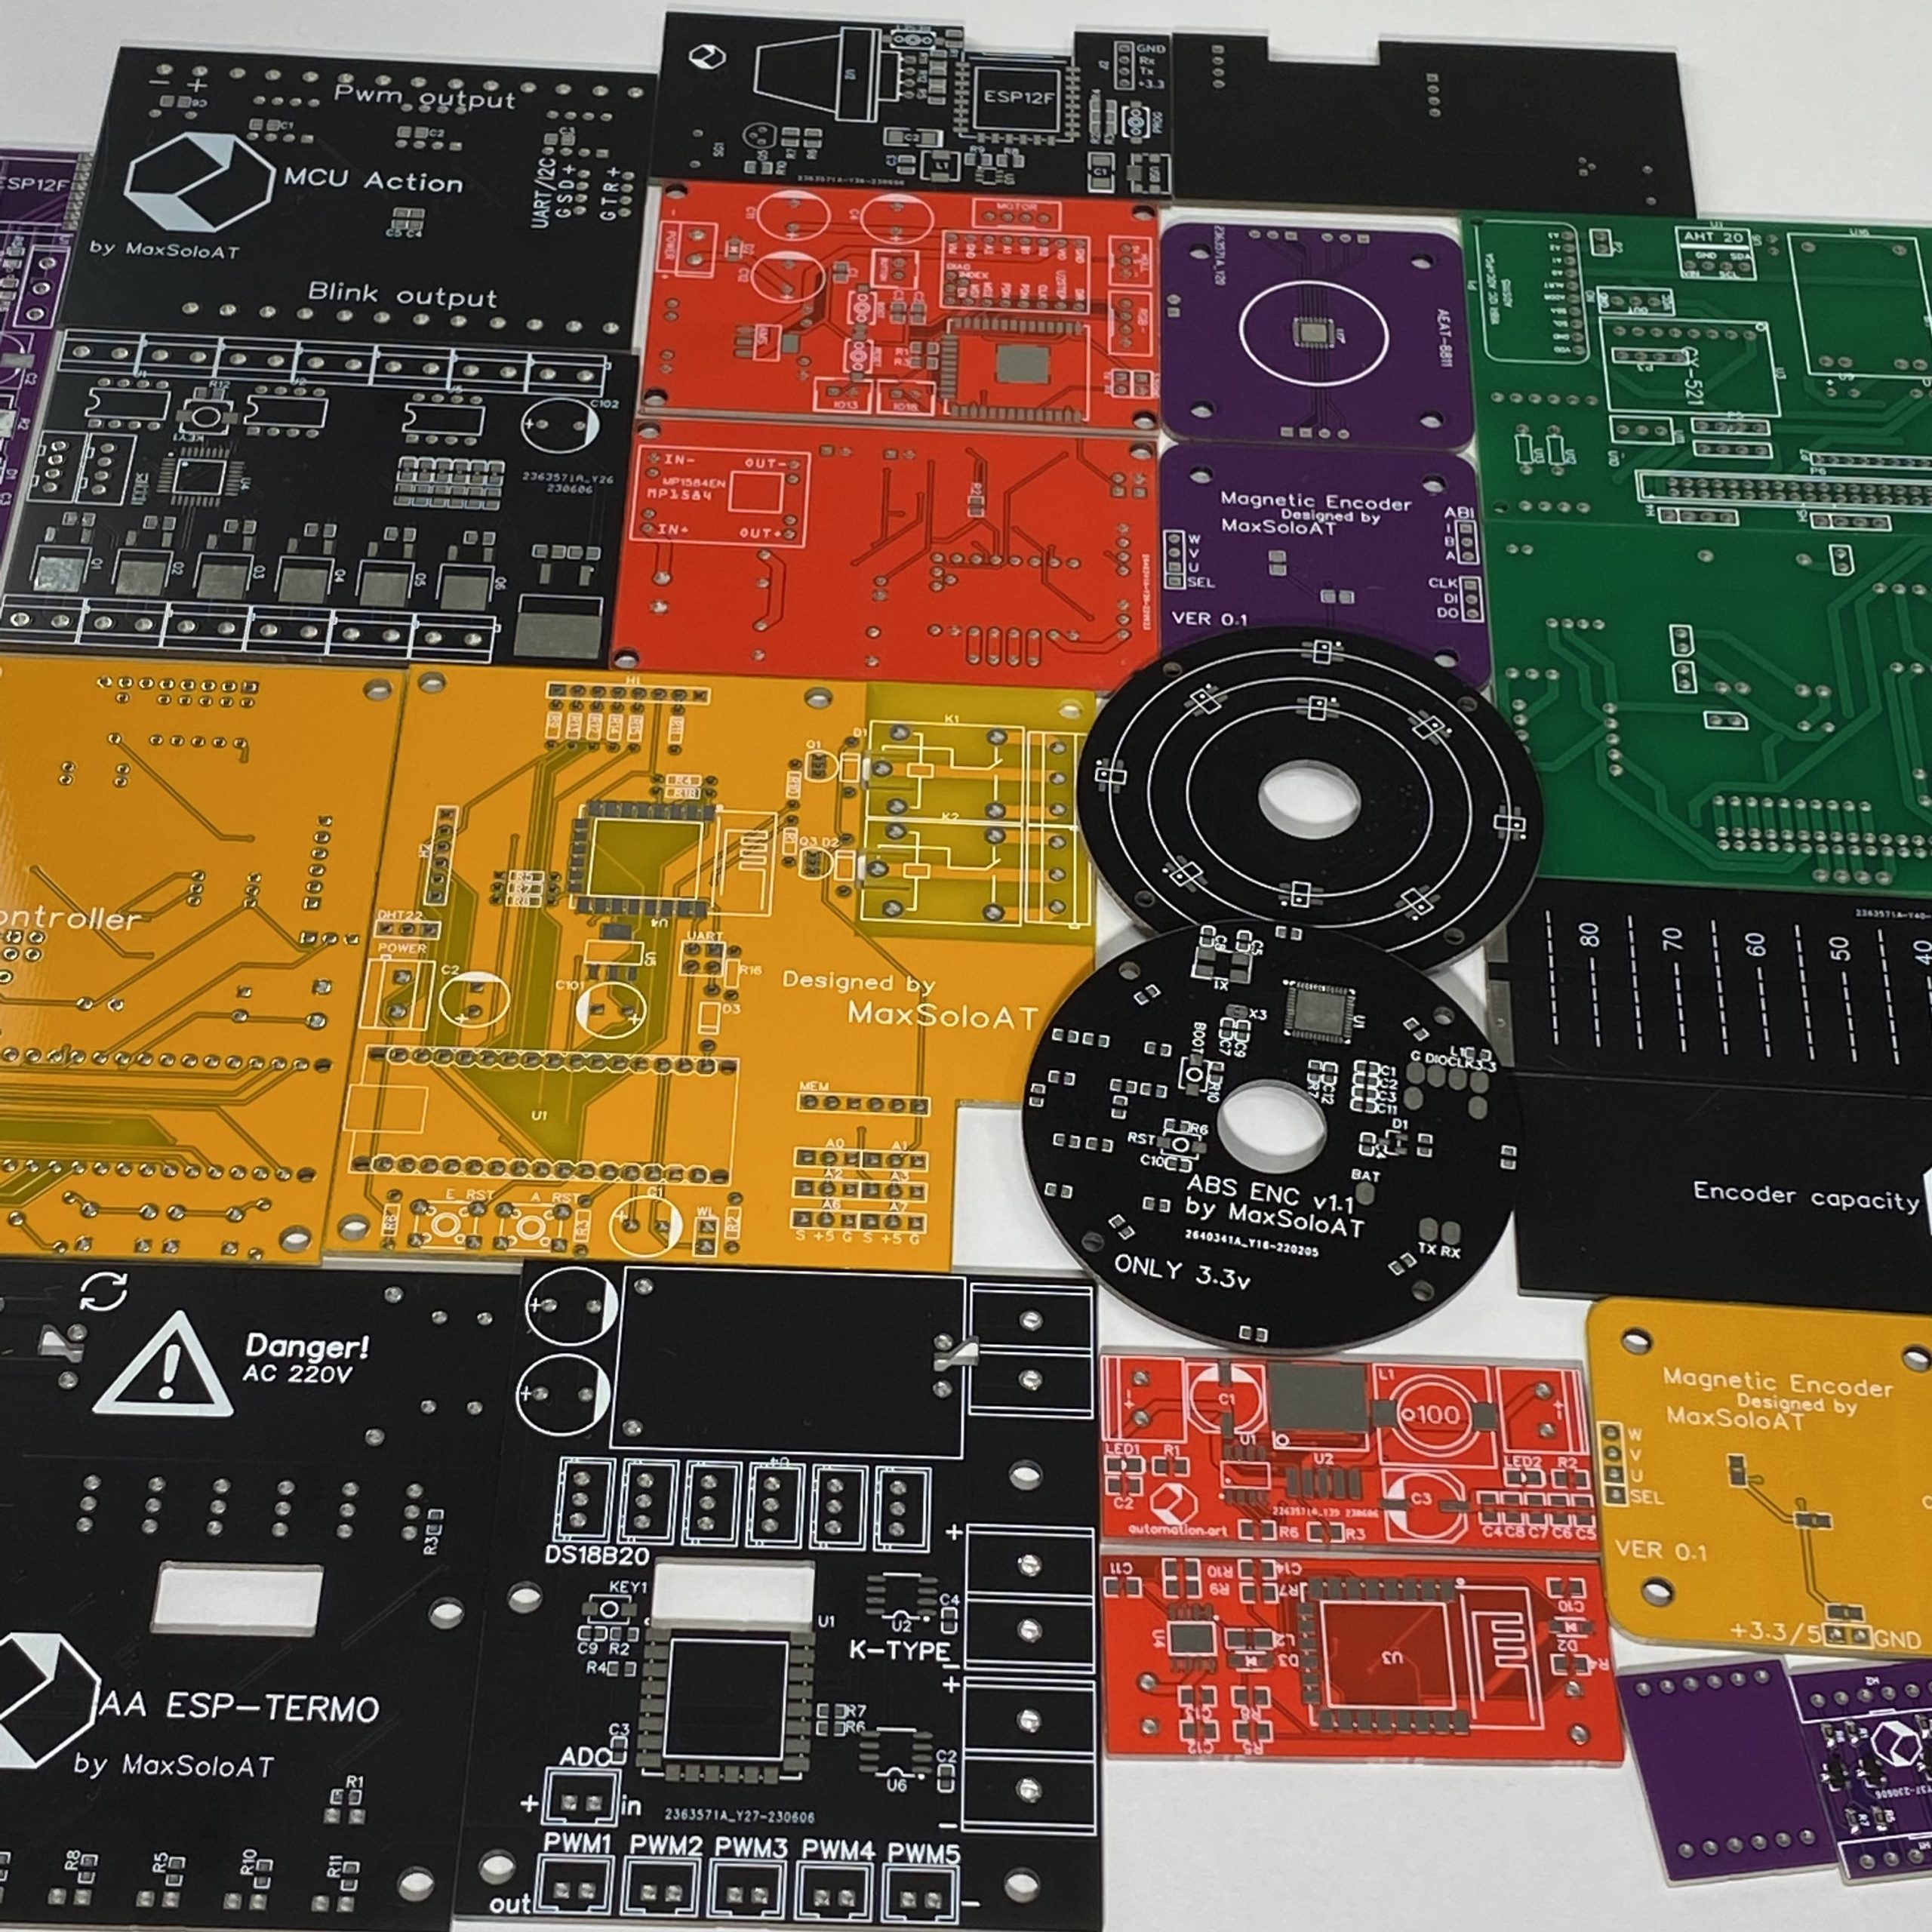 PCB design and manufacturing